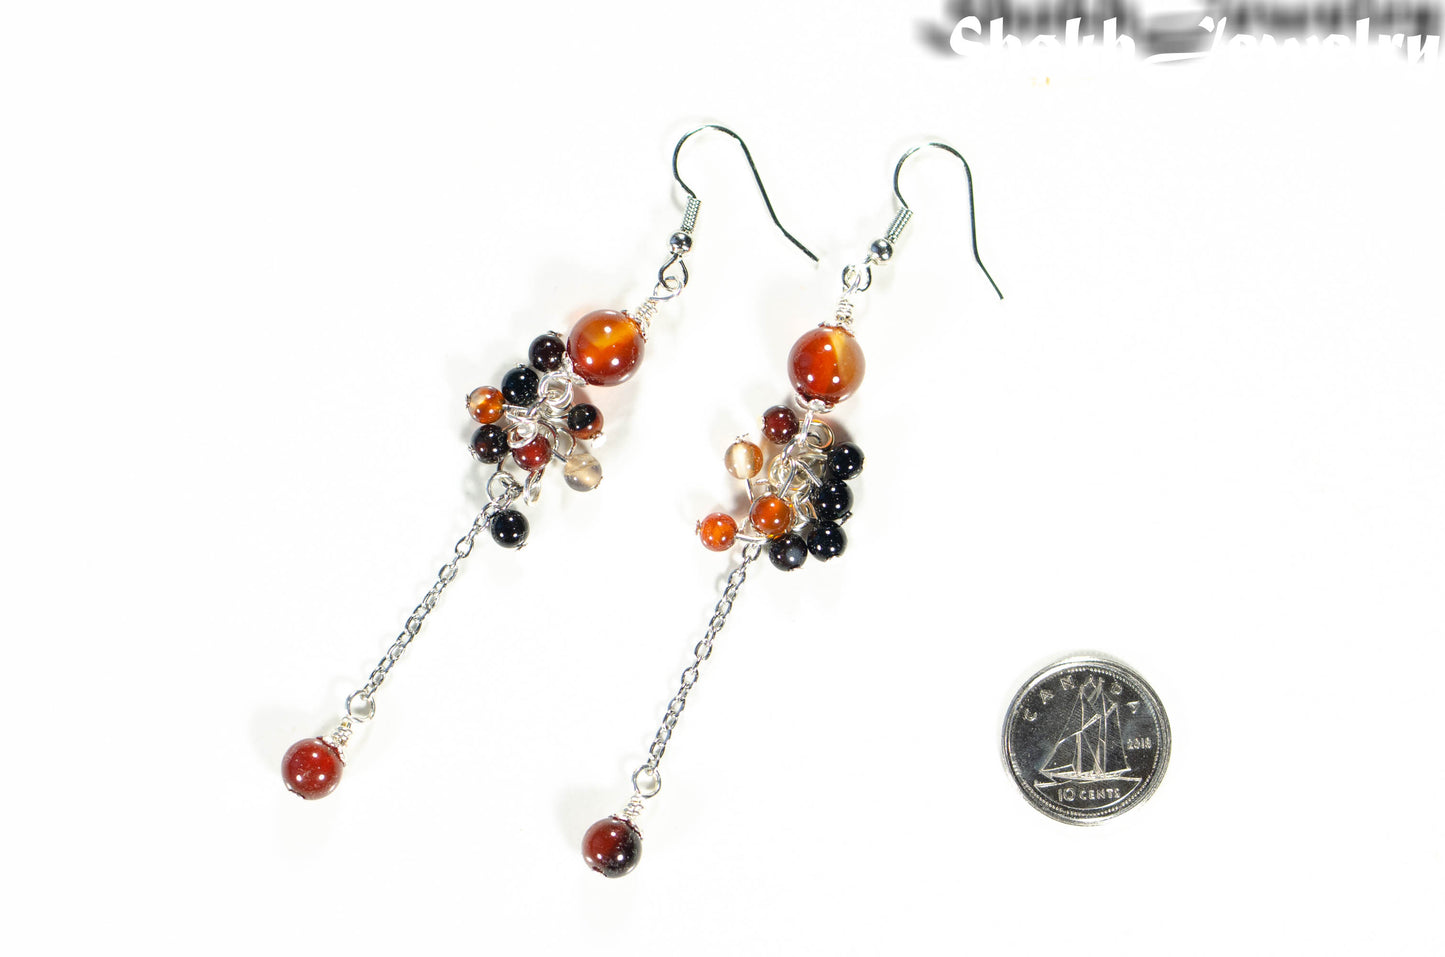 Long Stainless Steel Chain and Carnelian Earrings beside a dime.